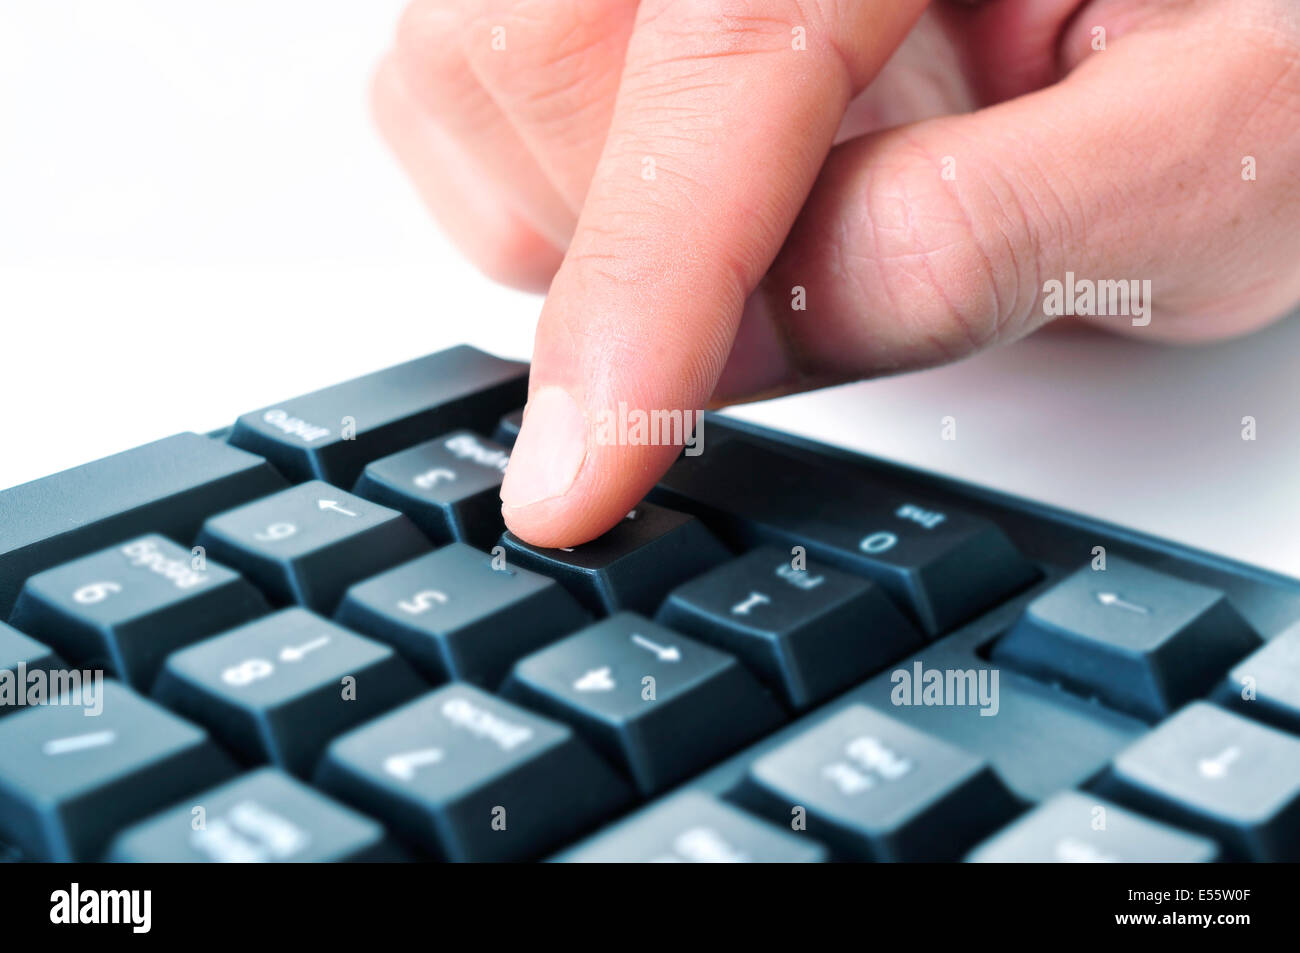 closeup of the hand of a man using the numeric keypad of a computer keyboard Stock Photo